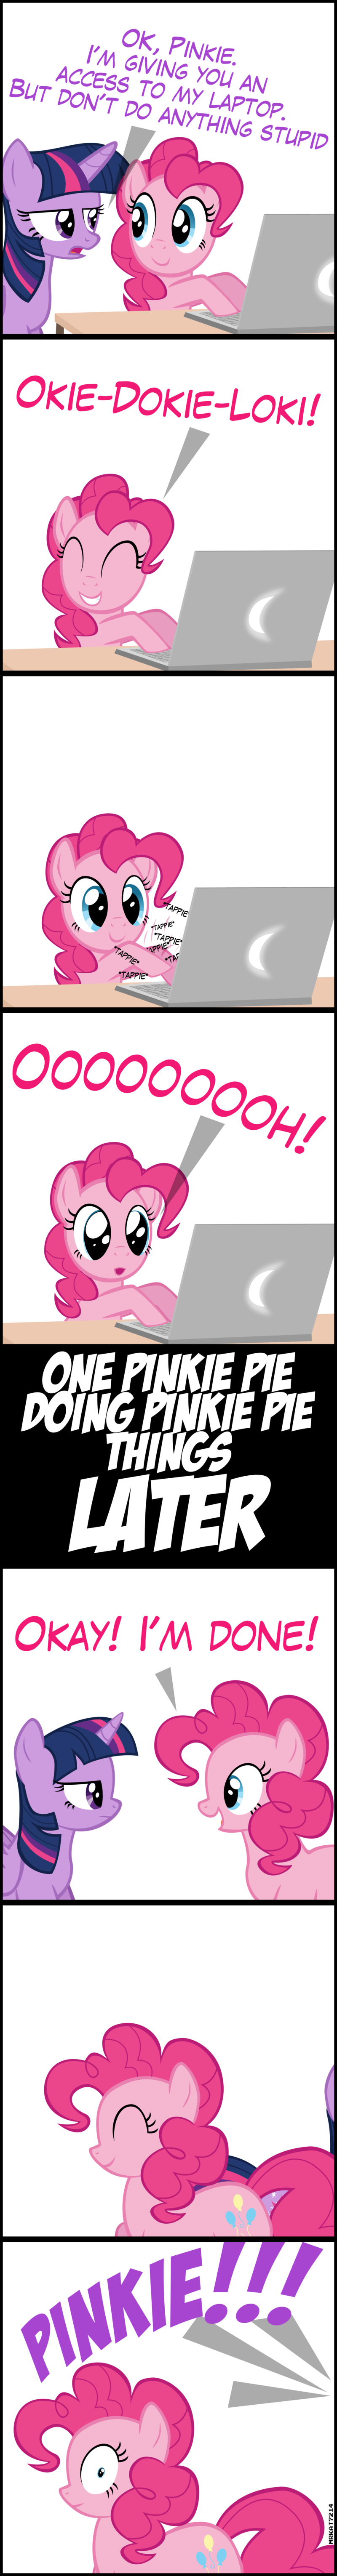 Comic 15 - Pinkie Gives a Try